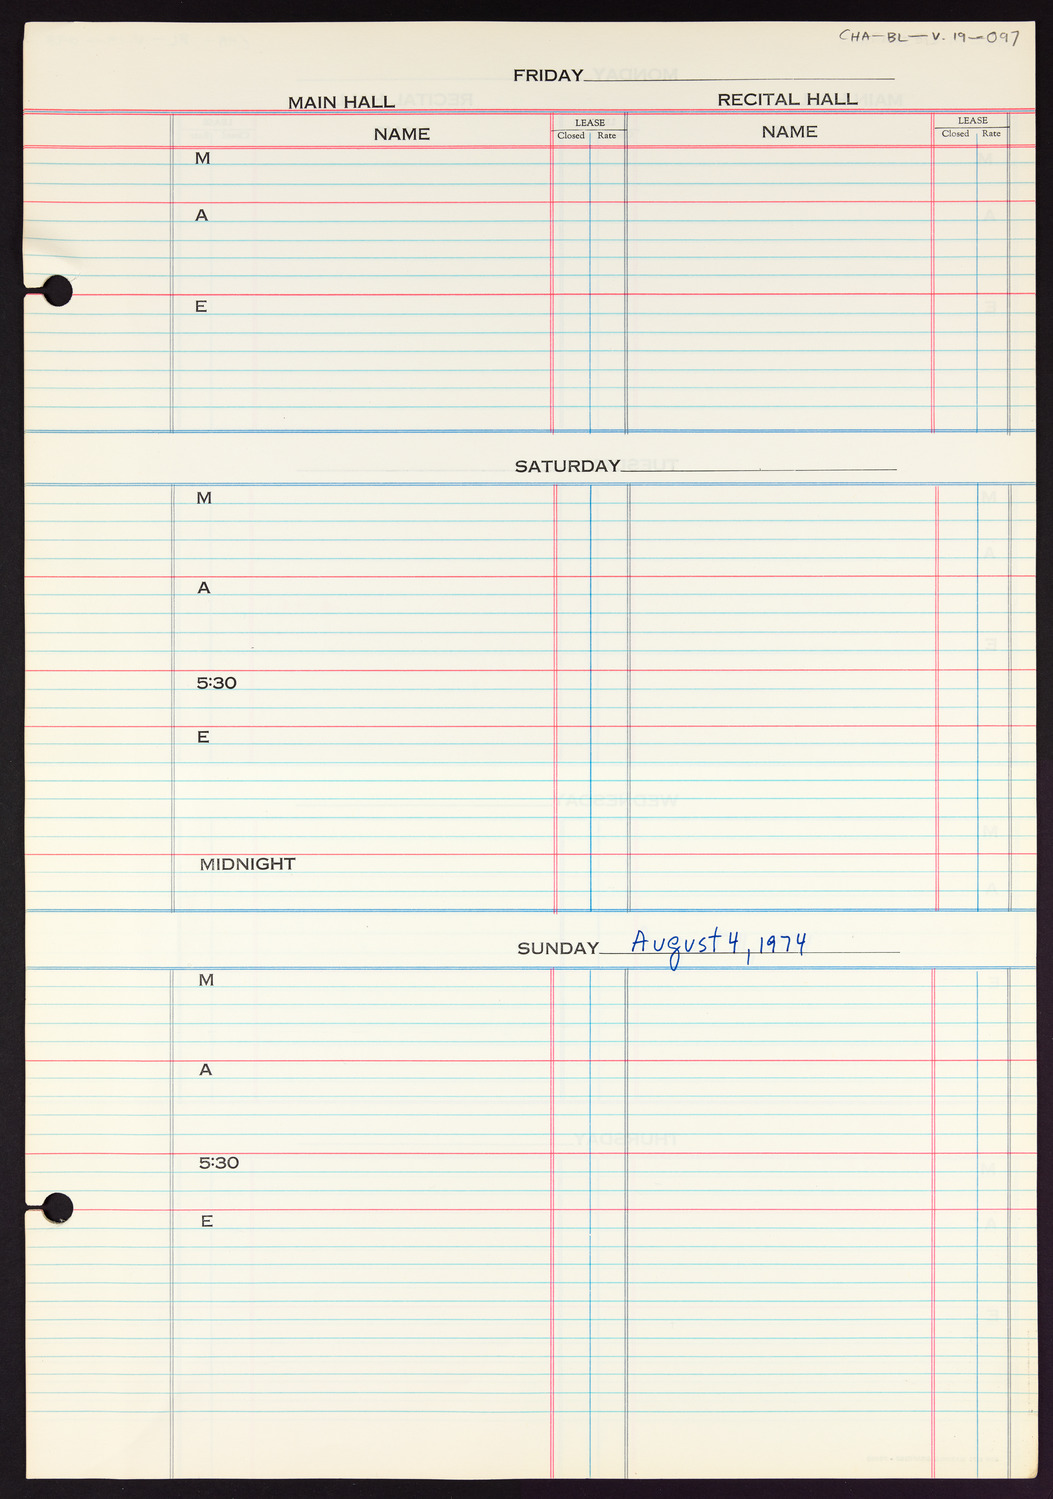 Carnegie Hall Booking Ledger, volume 19, page 97